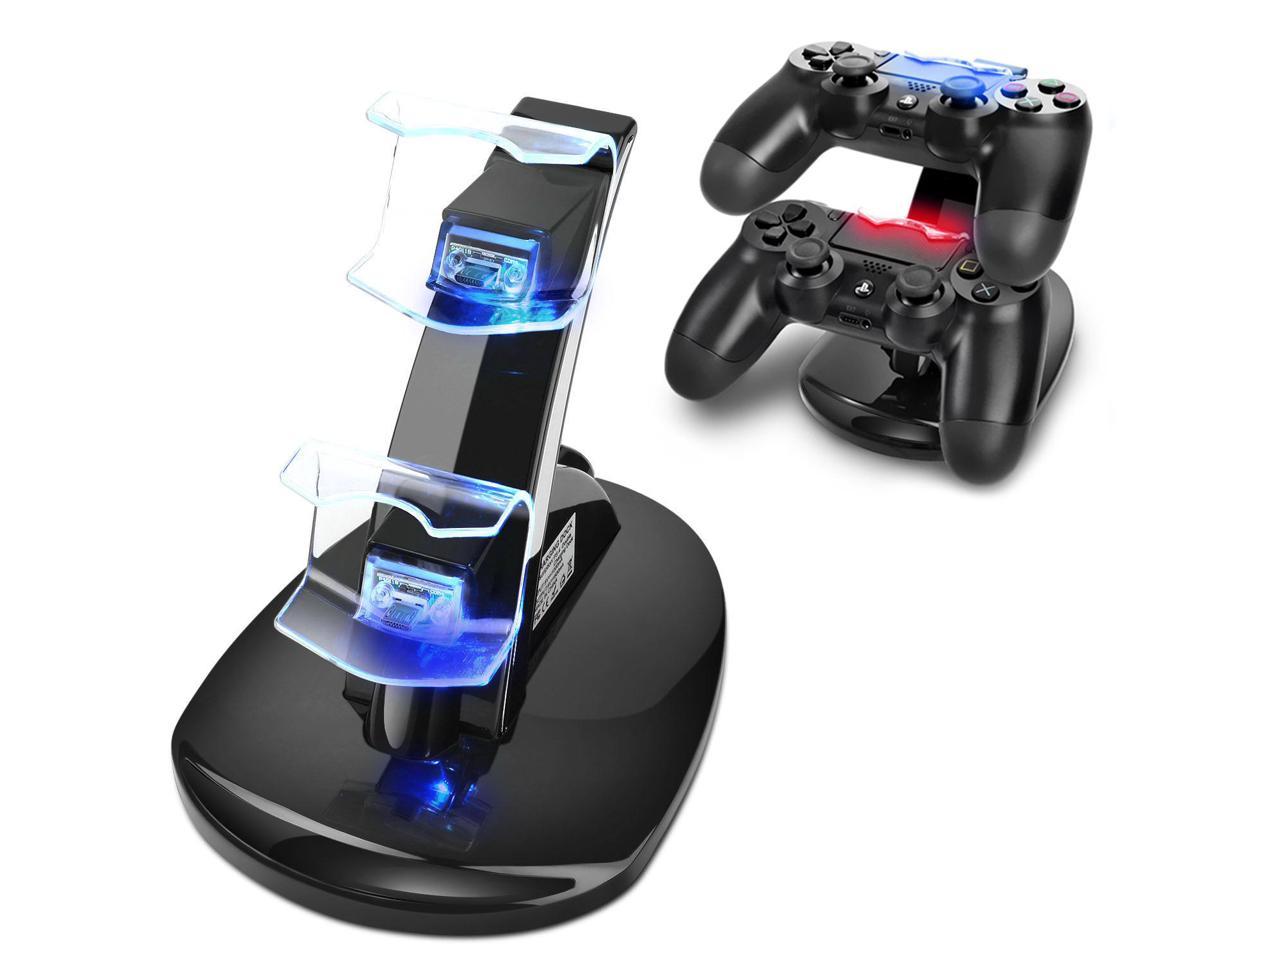 Plys dukke fordelagtige tømmerflåde PS4 Controller Charge Station - 2x USB Simultaneous Charger Dual Charging  Dock Cradle Stand Accessory for Sony Playstation 4 Gaming Control with LED  Indicator + Micro Cable (Black) - Newegg.com